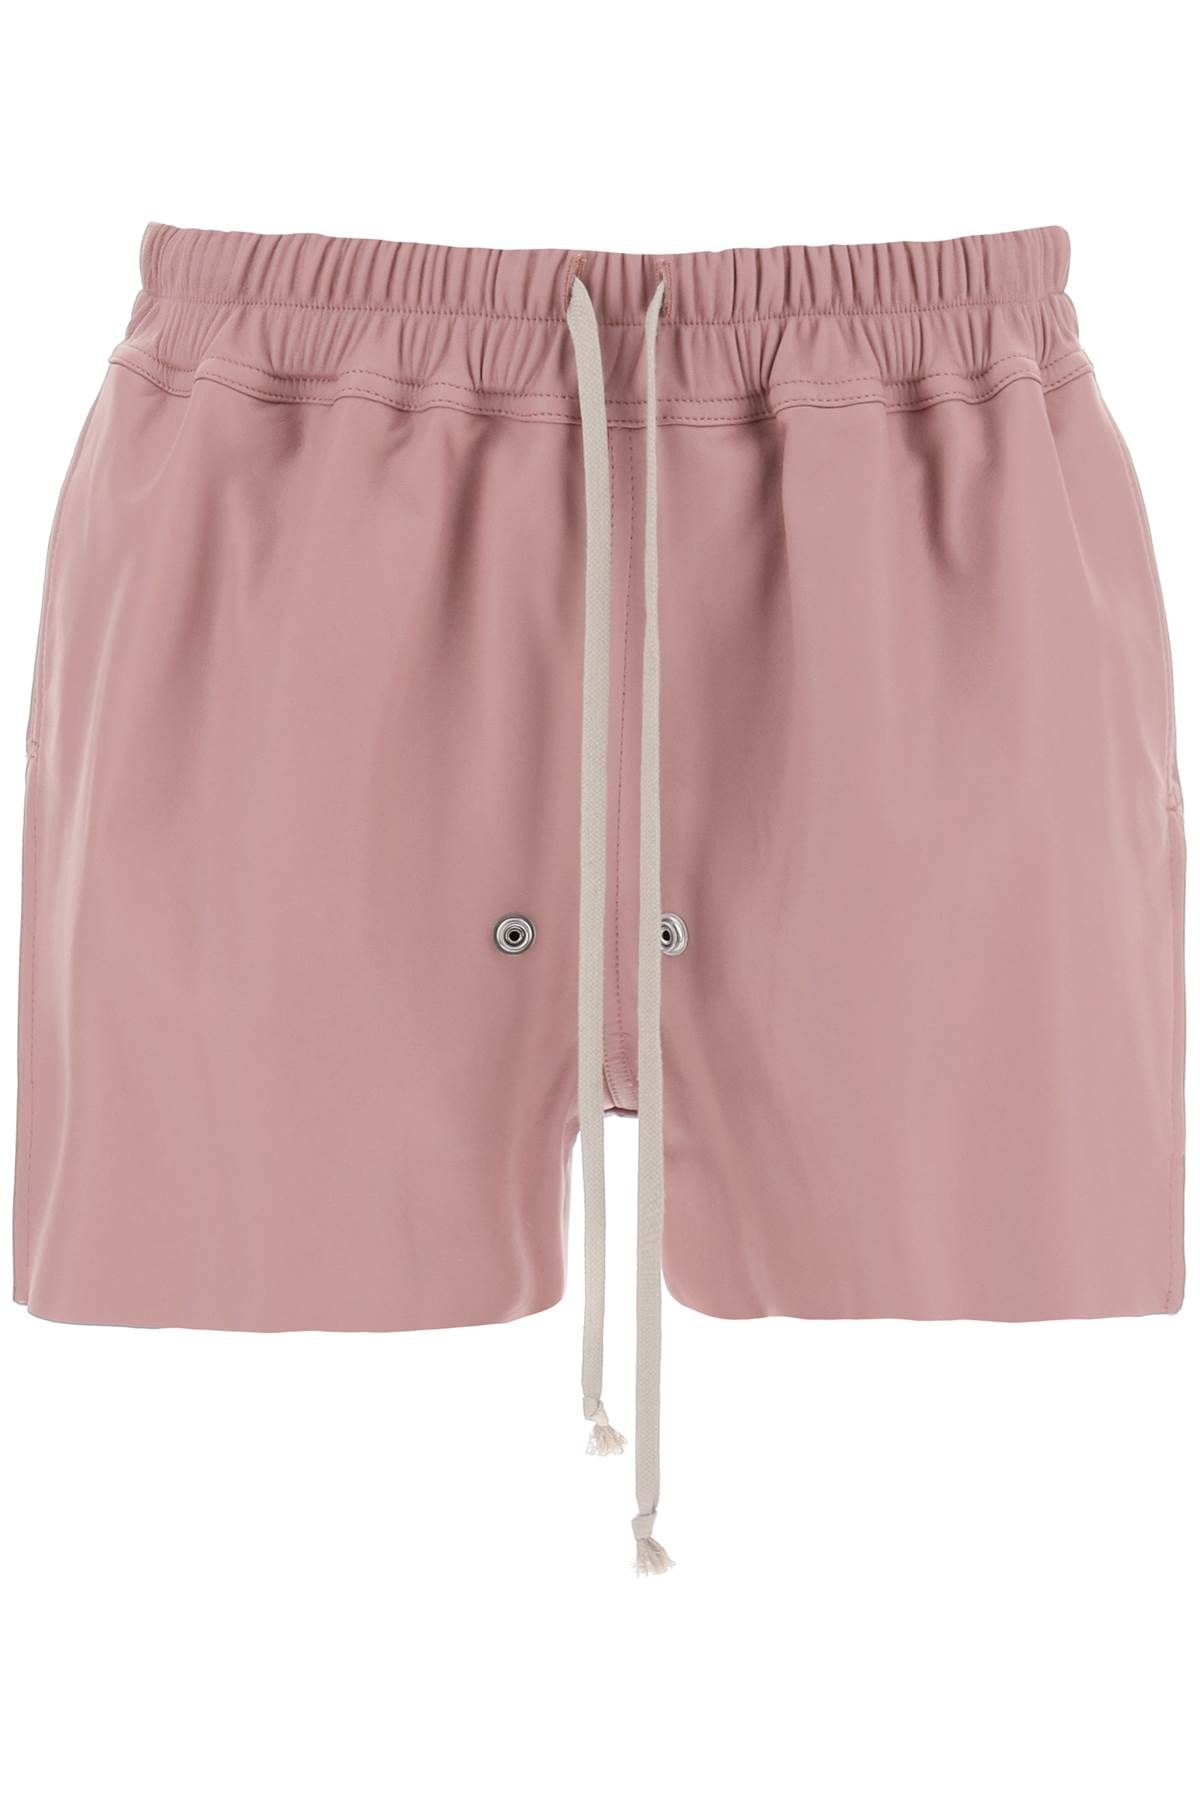 Rick Owens Gabe Leather Shorts For Men In Pink